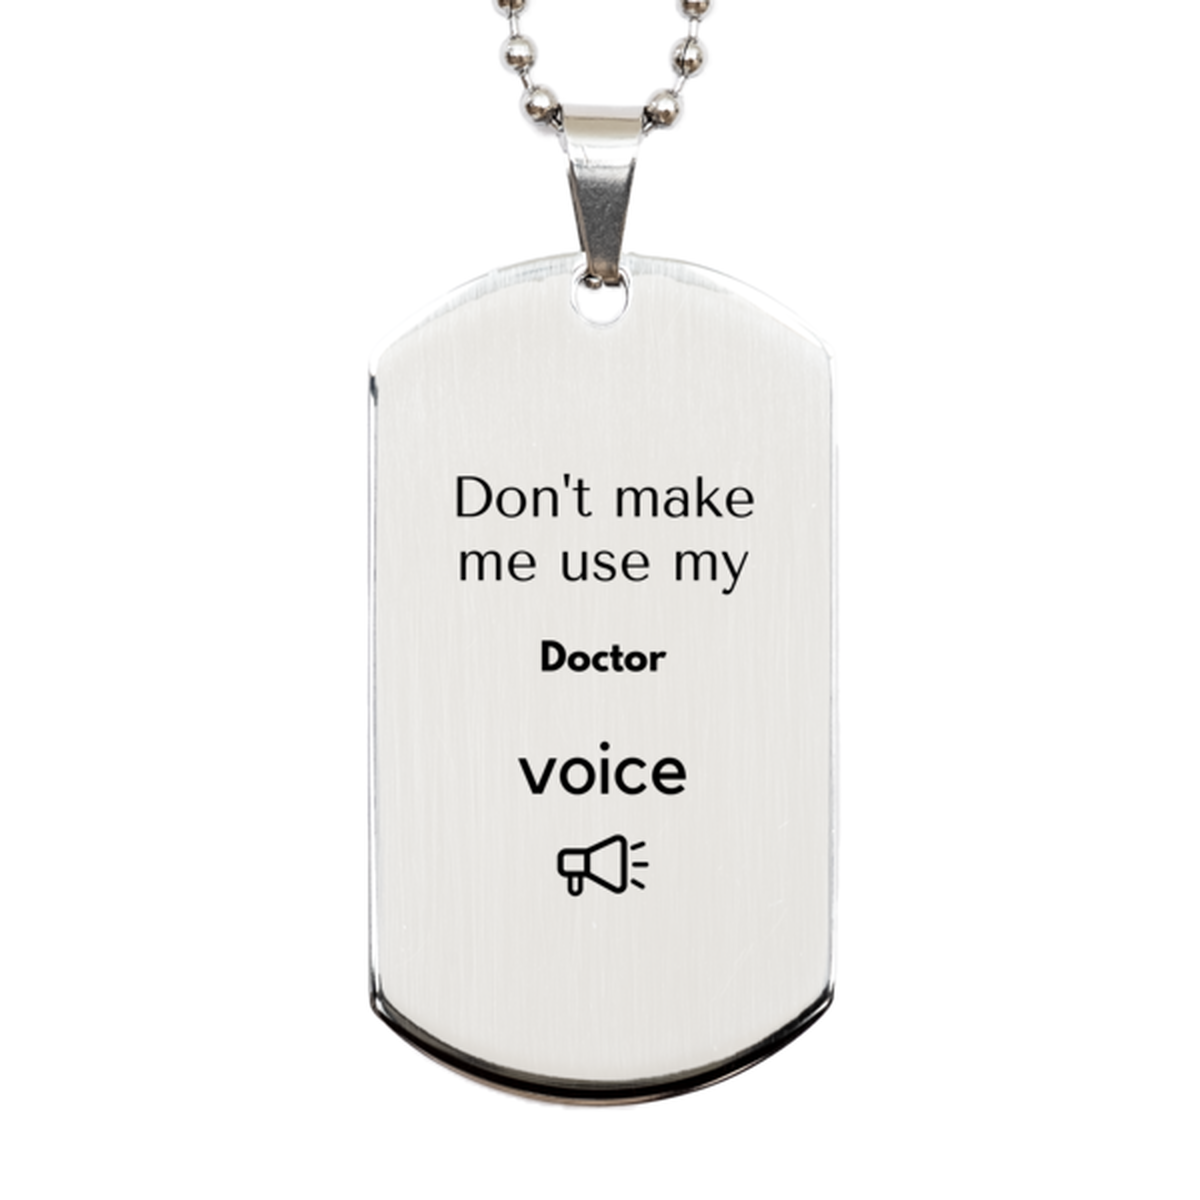 Don't make me use my Doctor voice, Sarcasm Doctor Gifts, Christmas Doctor Silver Dog Tag Birthday Unique Gifts For Doctor Coworkers, Men, Women, Colleague, Friends